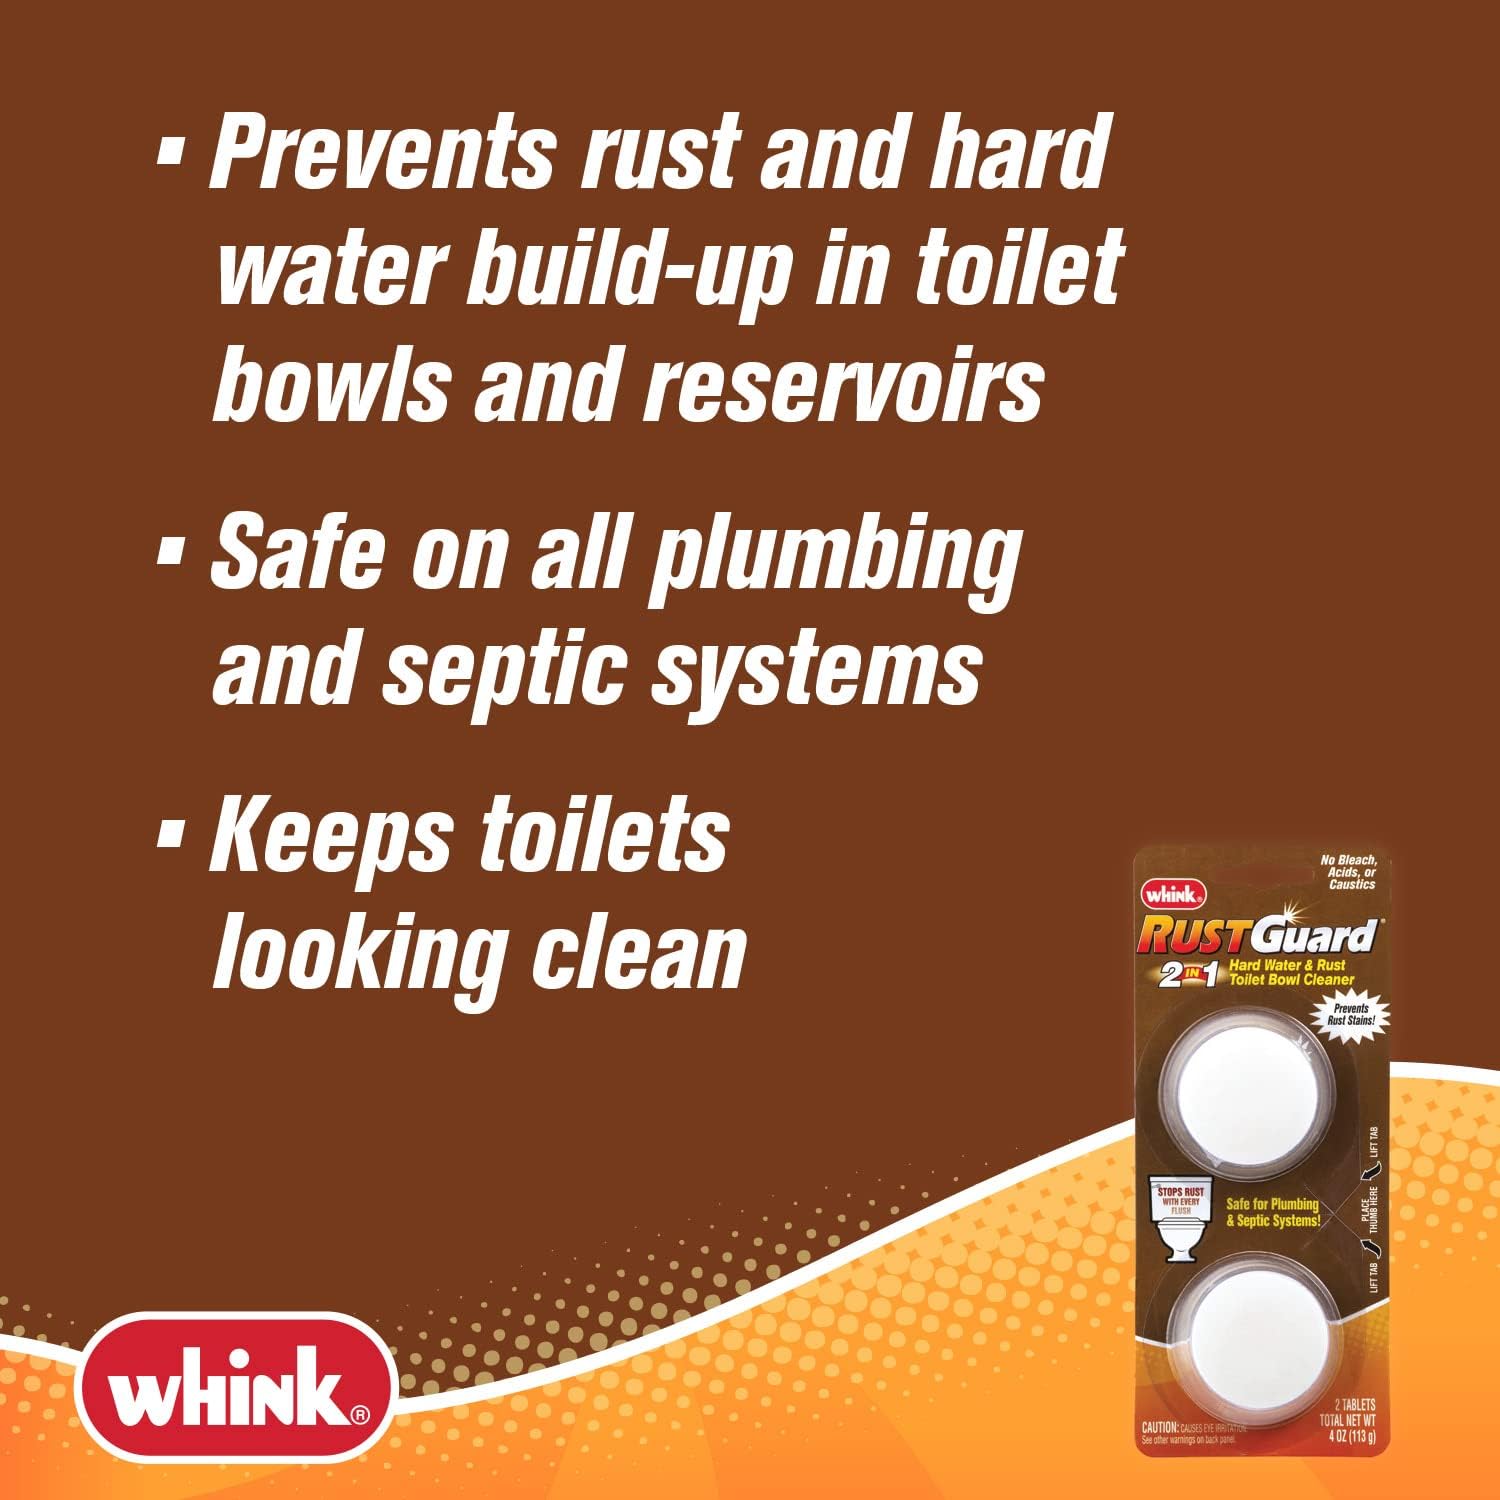 Whink RUSTGuard Time Released Toilet Bowl Cleaner Tablets – Pack of 2